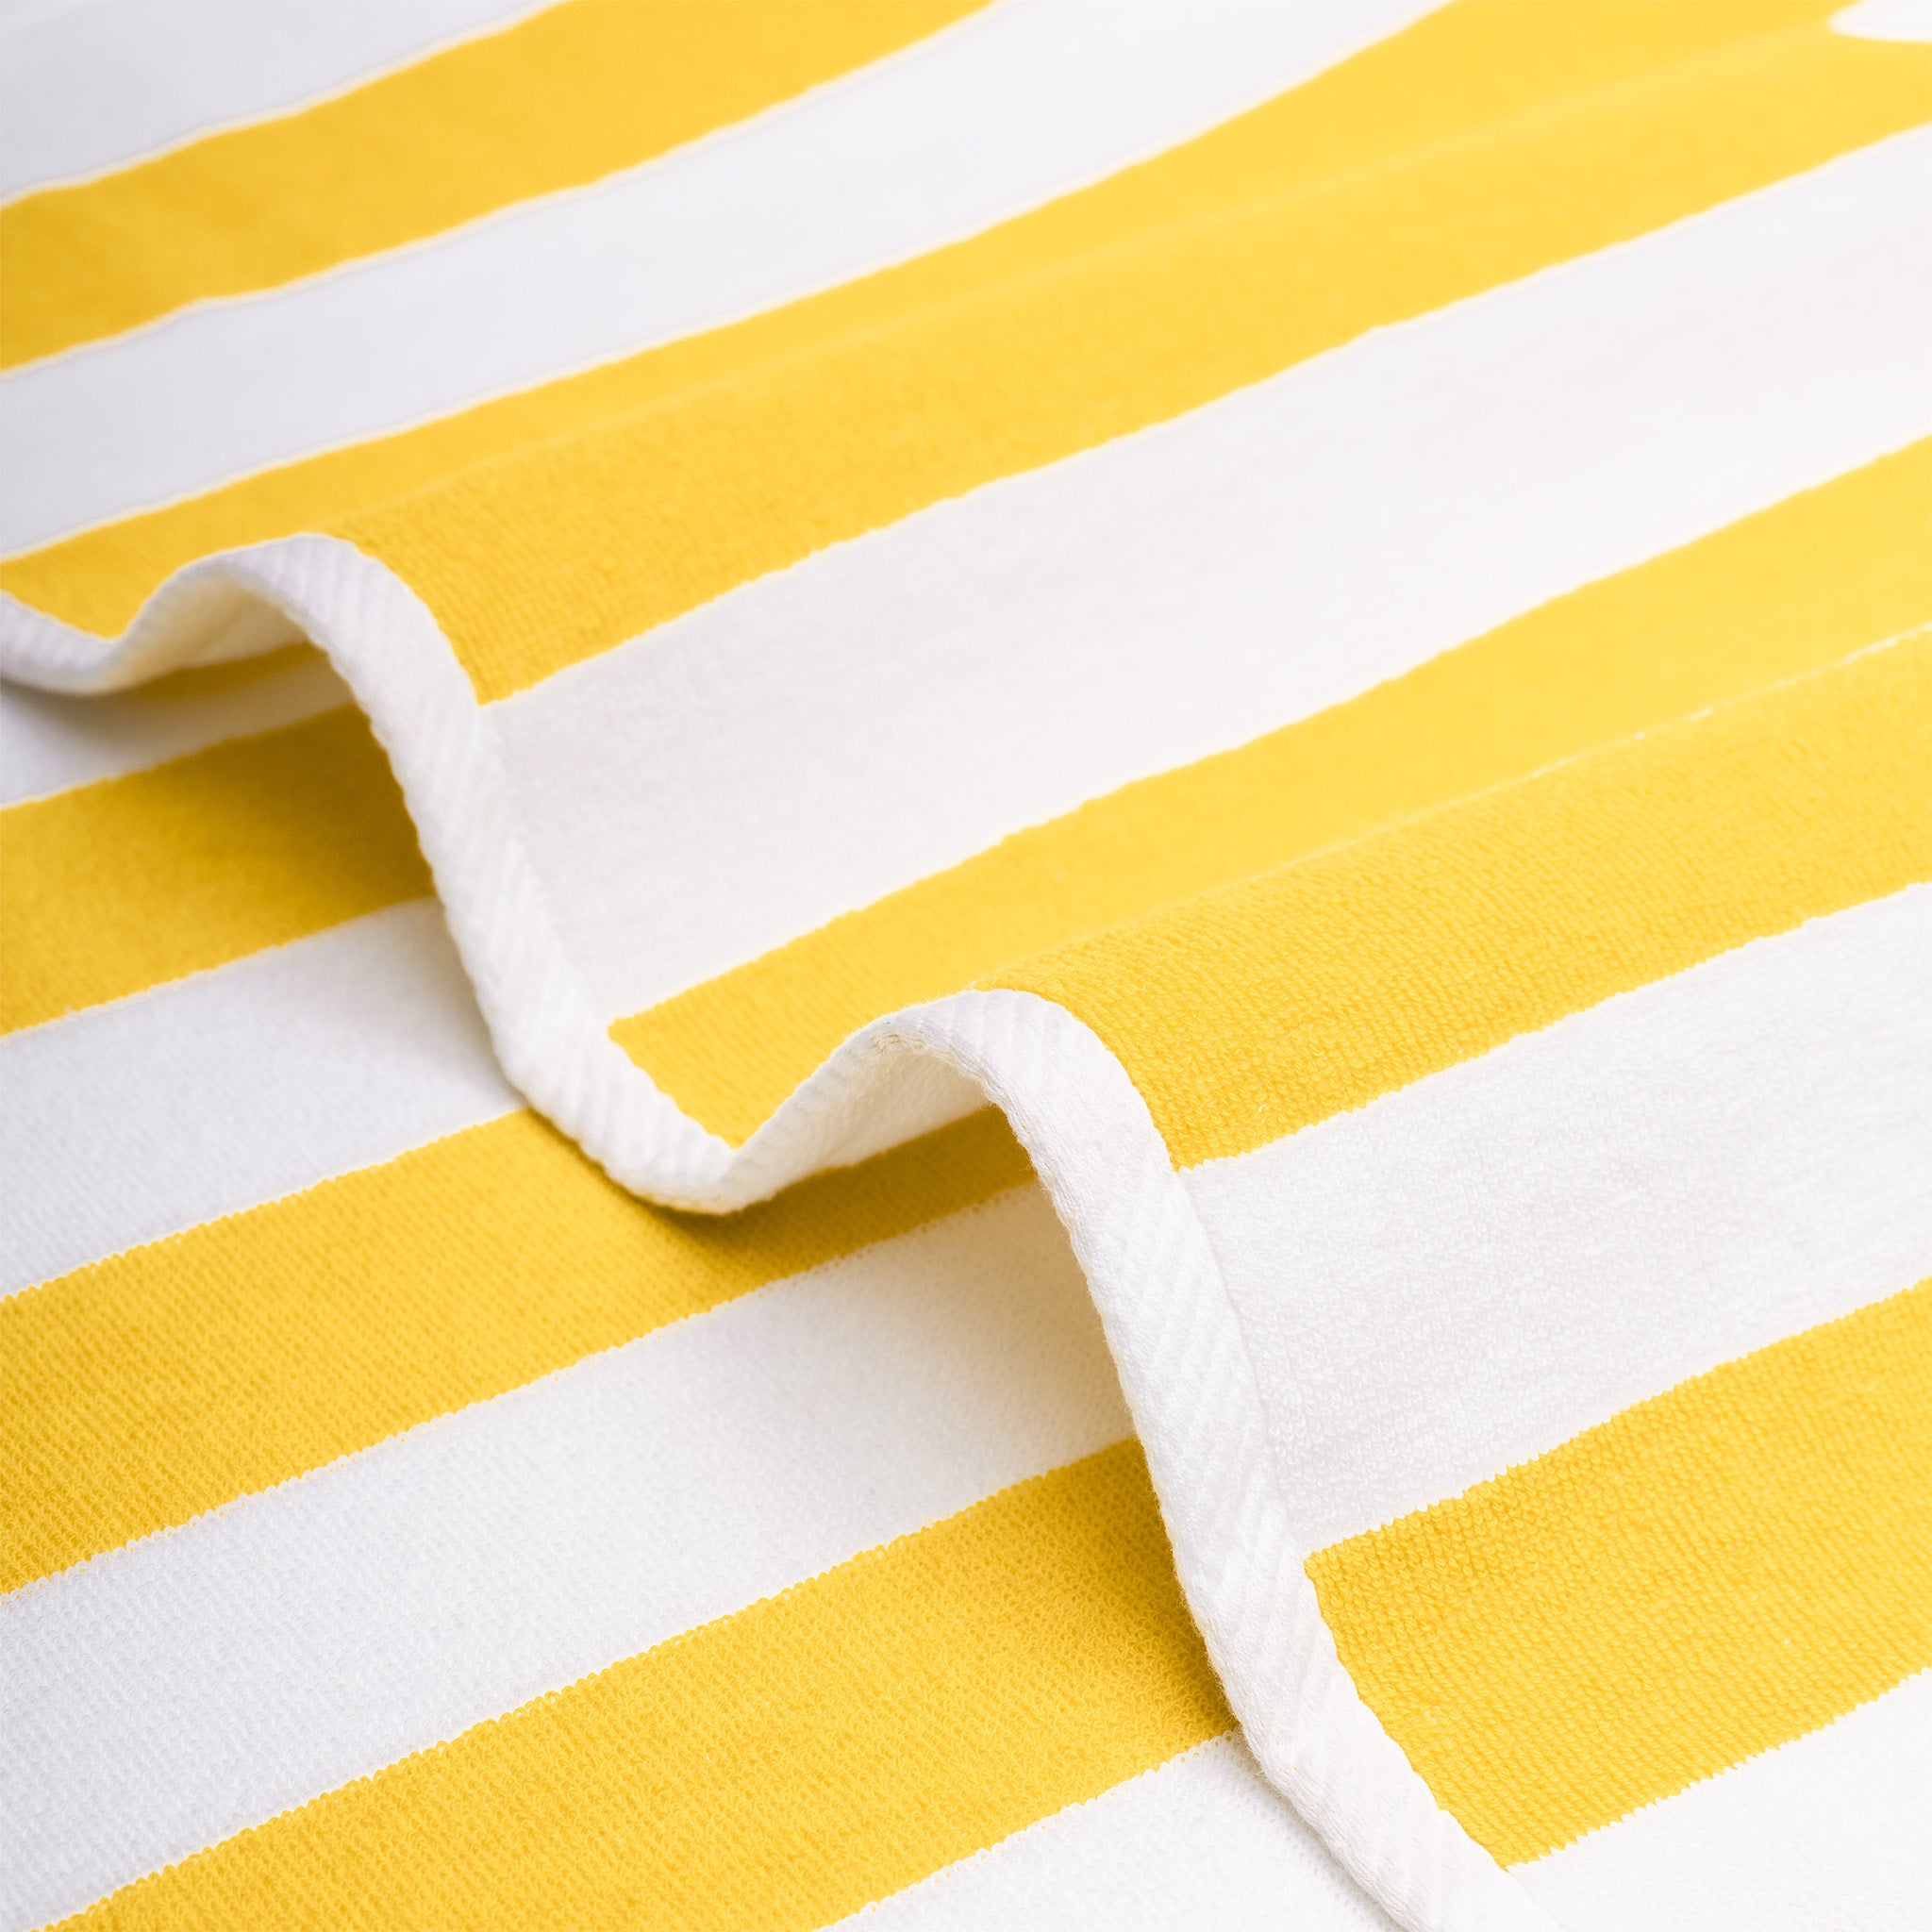 American Soft Linen, 100% Cotton 4 Pack Beach Towels, 30 x 60 Cabana Striped Pool Towels, Yellow